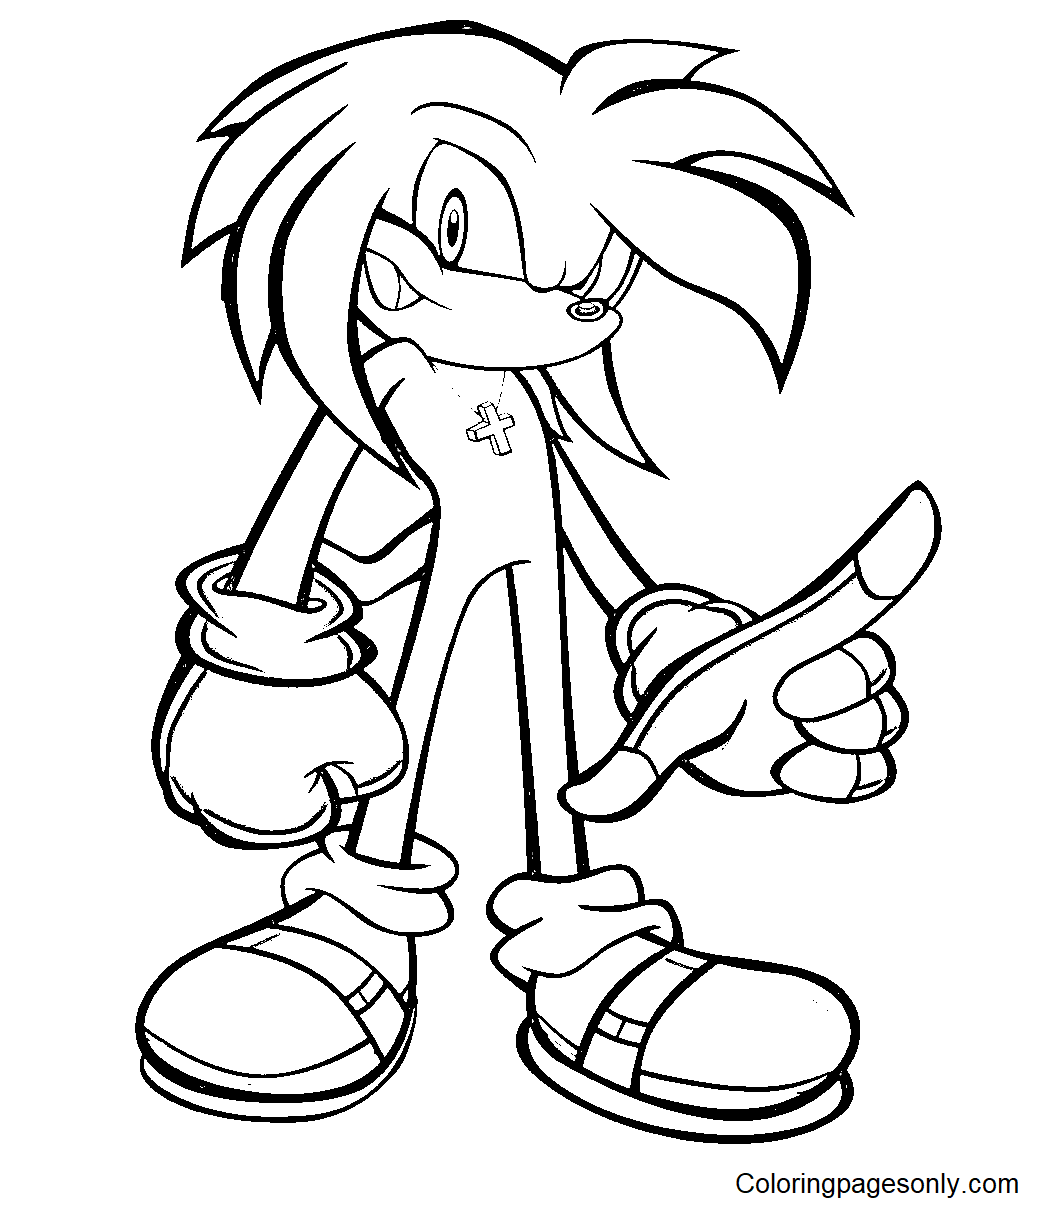 Knuckles Cartoon Coloring Page